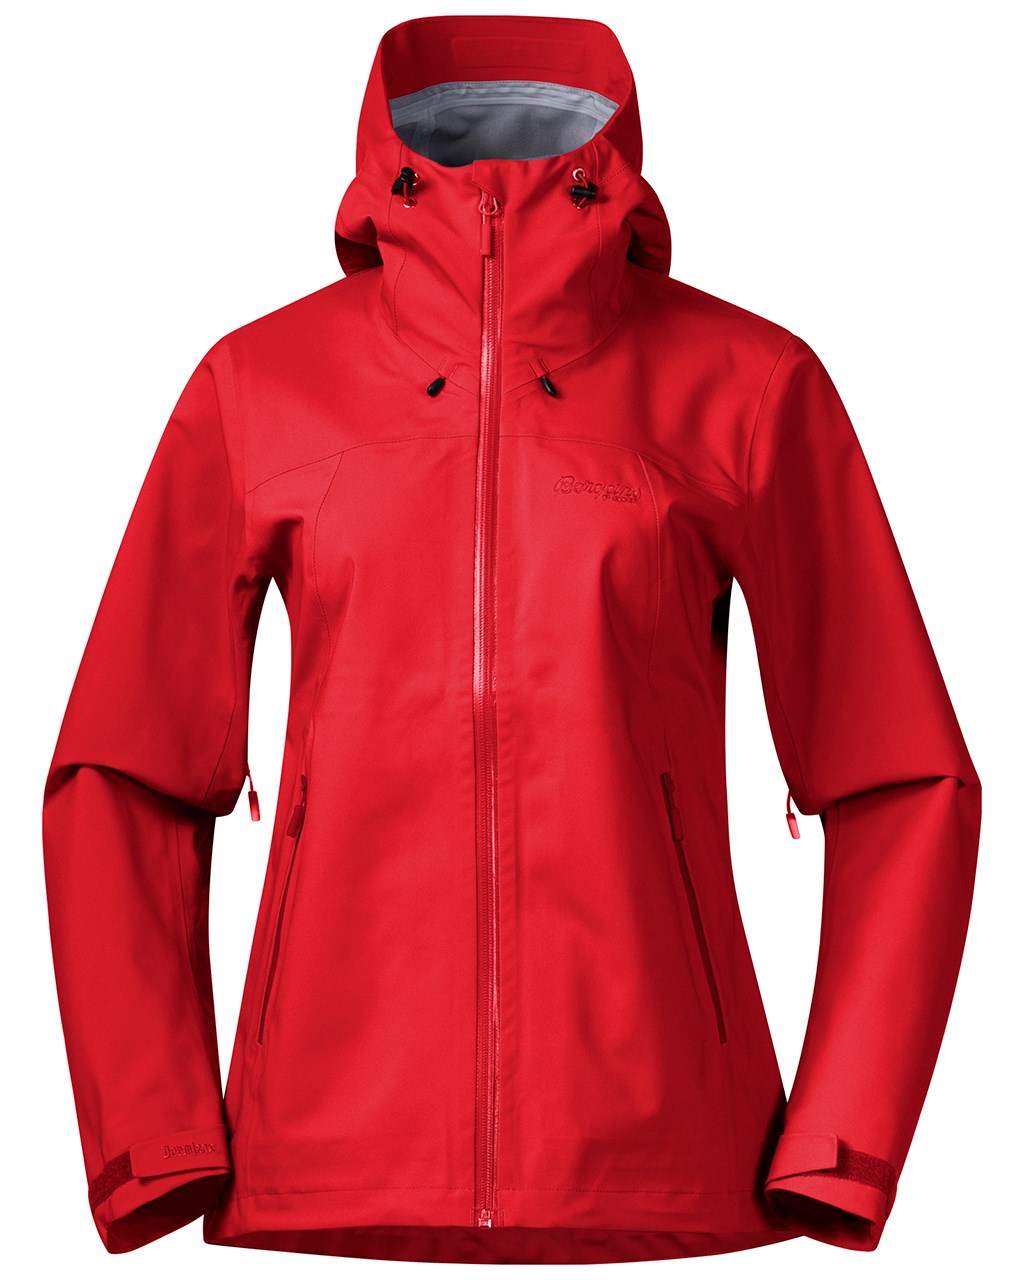 3L Jacket Fire Red/Red